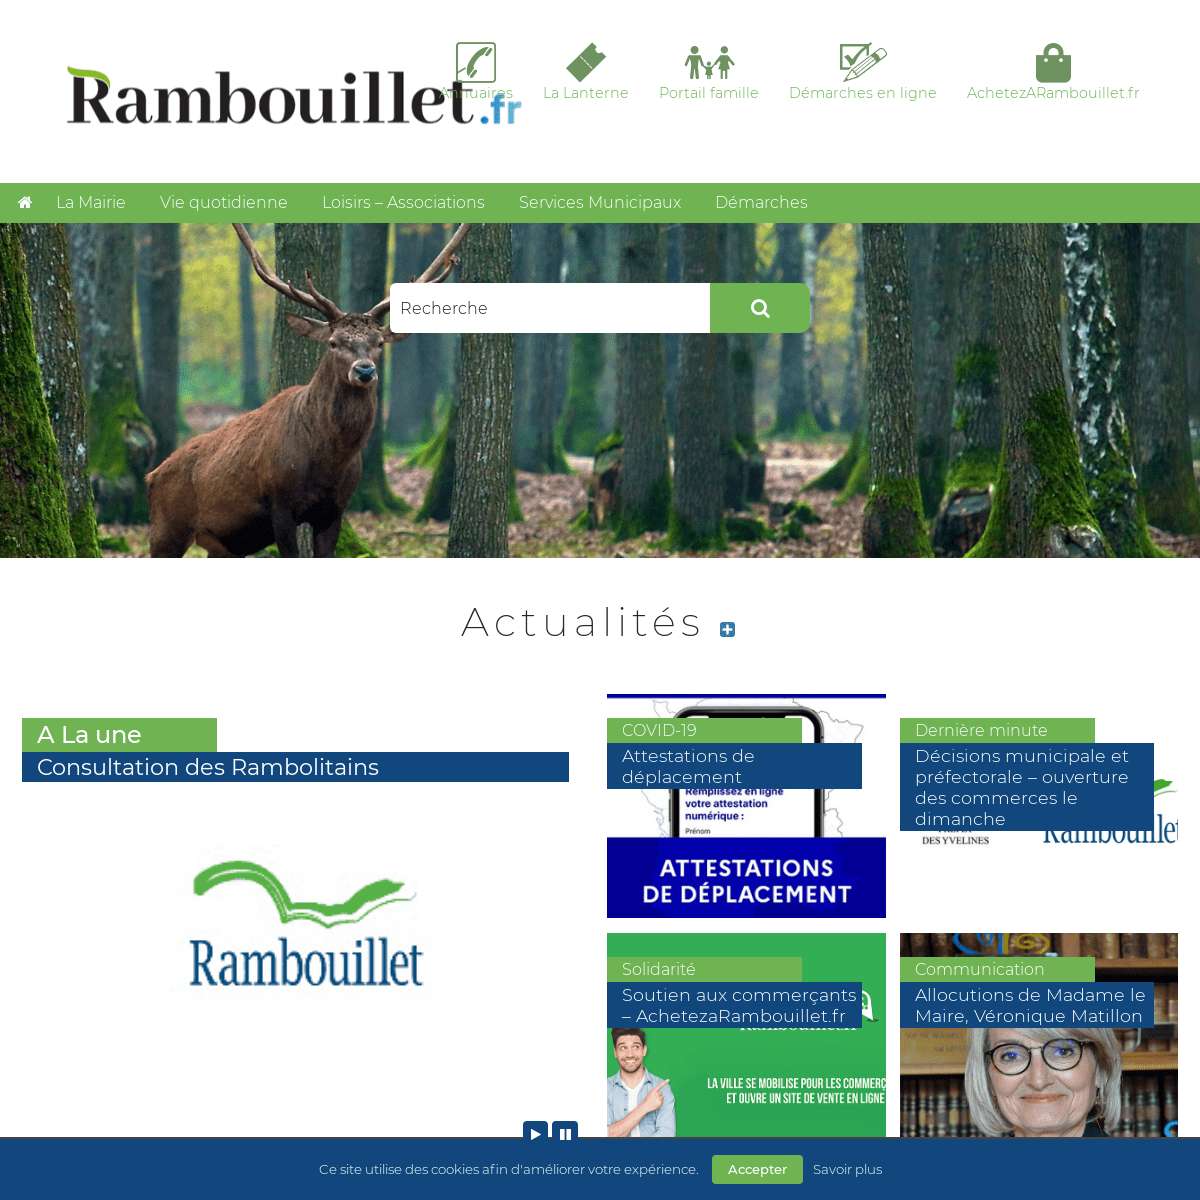 A complete backup of rambouillet.fr